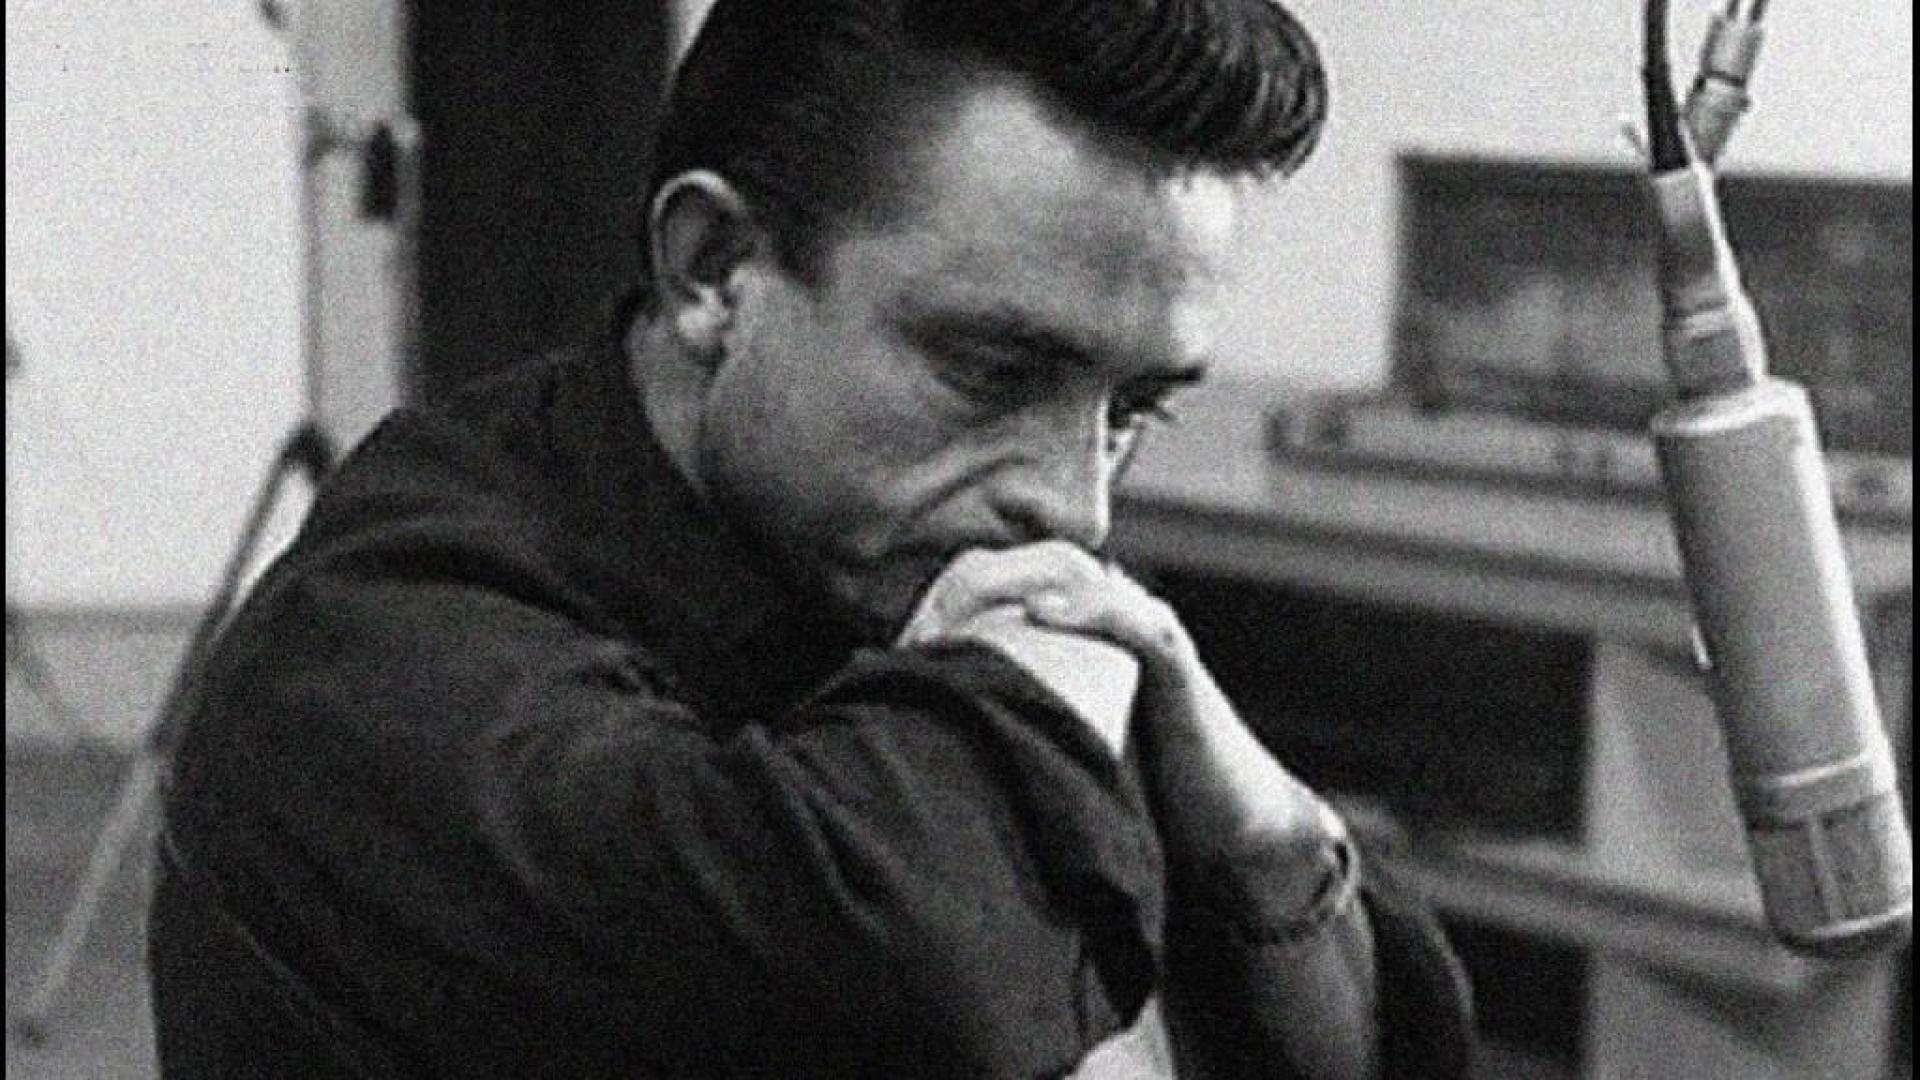 Johnny cash - (#79455) - High Quality and Resolution Wallpapers on ...